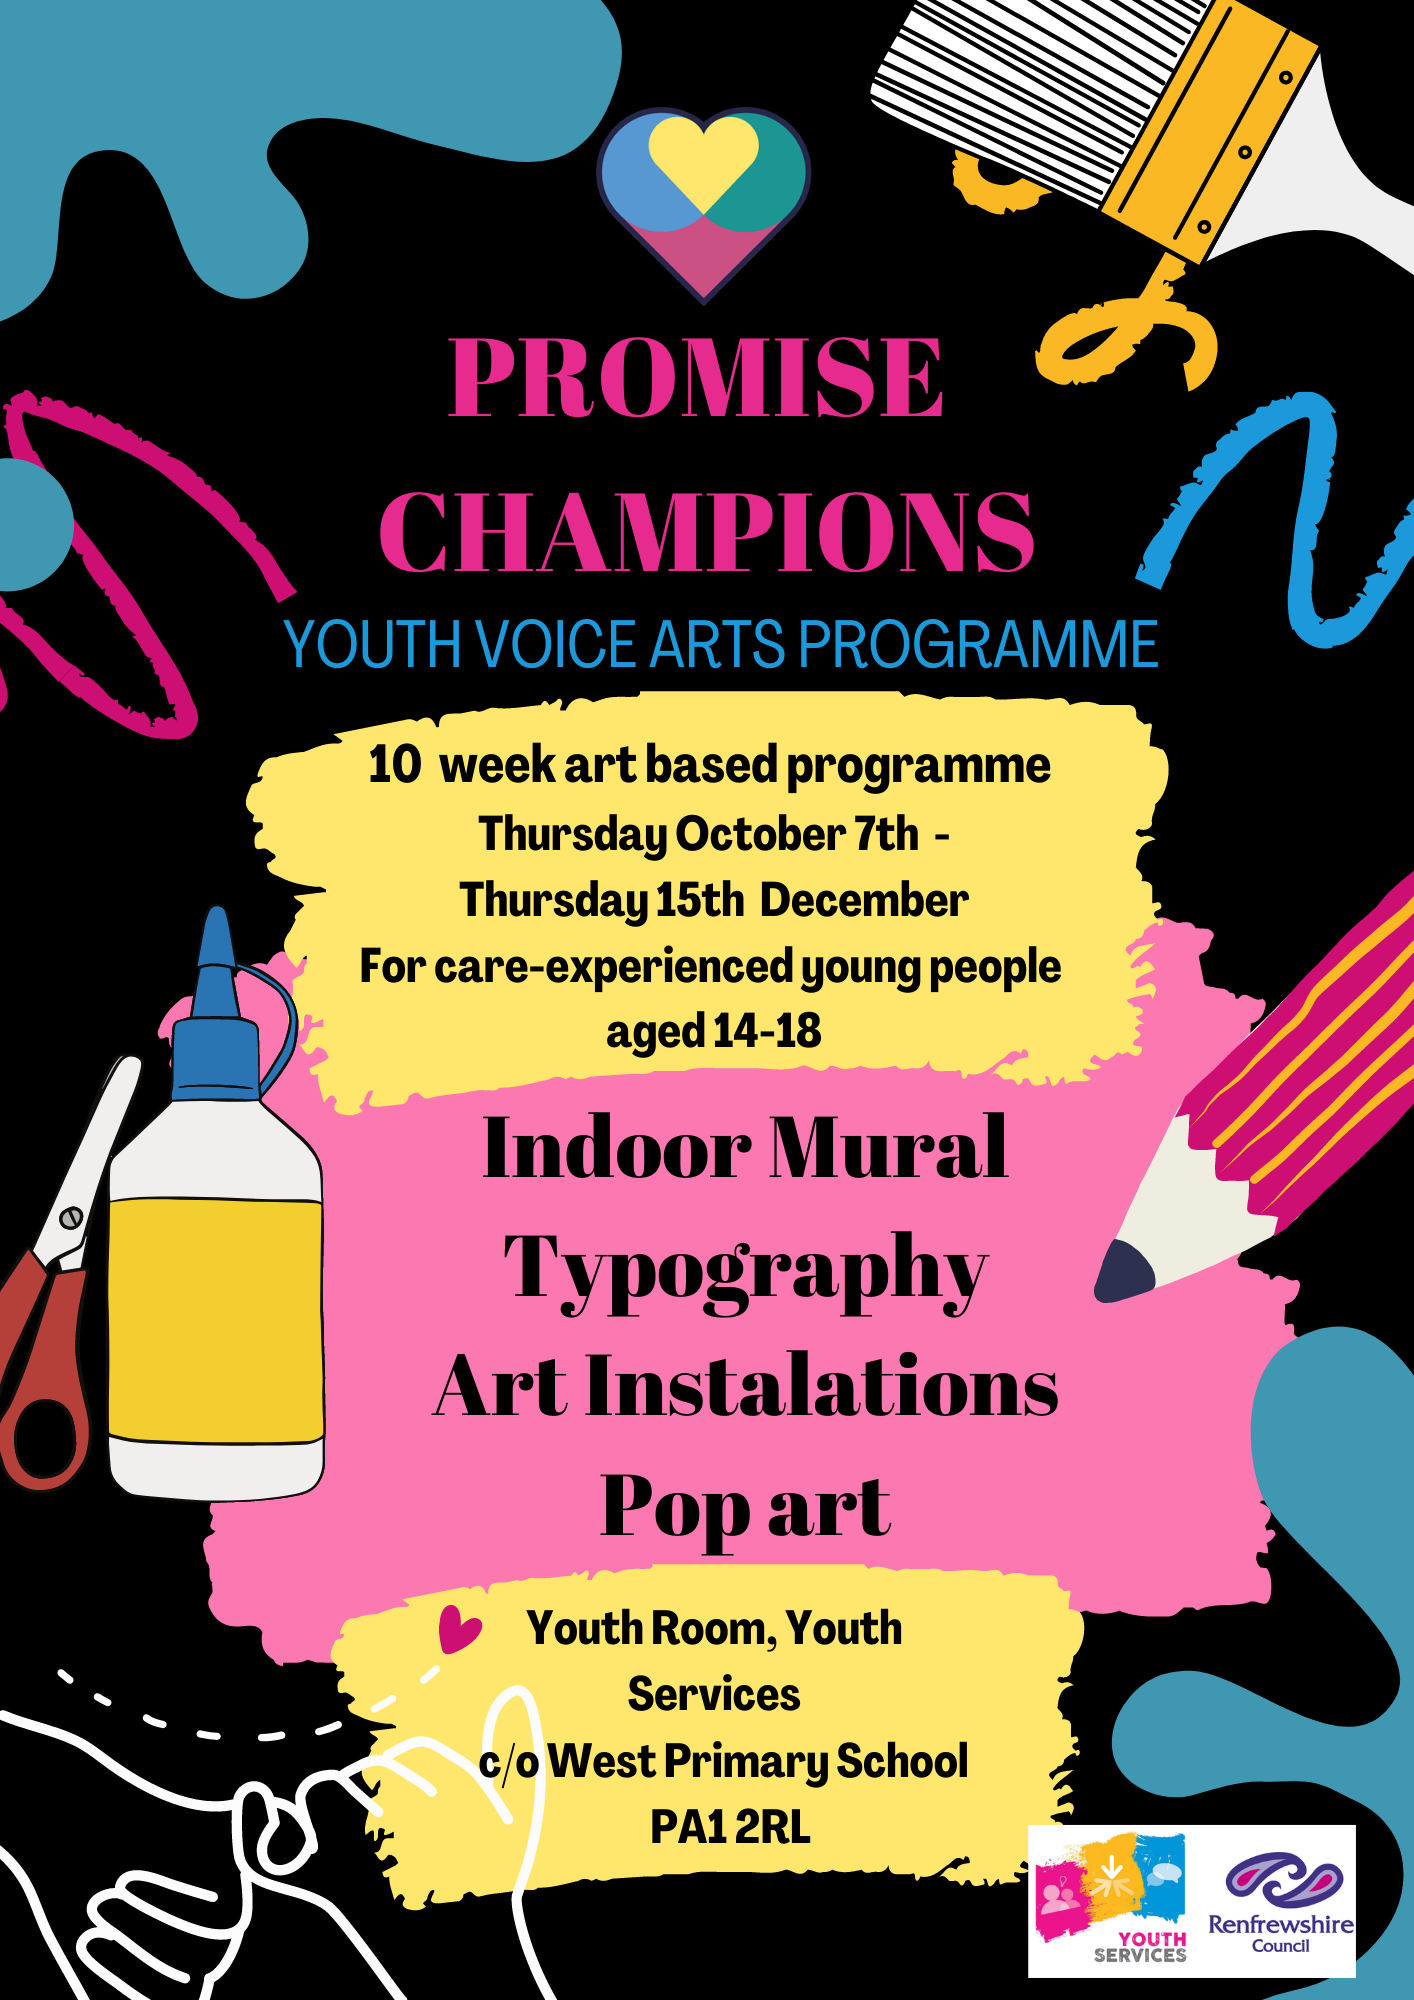 Promise Champions Arts Programme Poster - Indoor mural typography art installations pop up. Youth Room, Youth services at West Primacy School